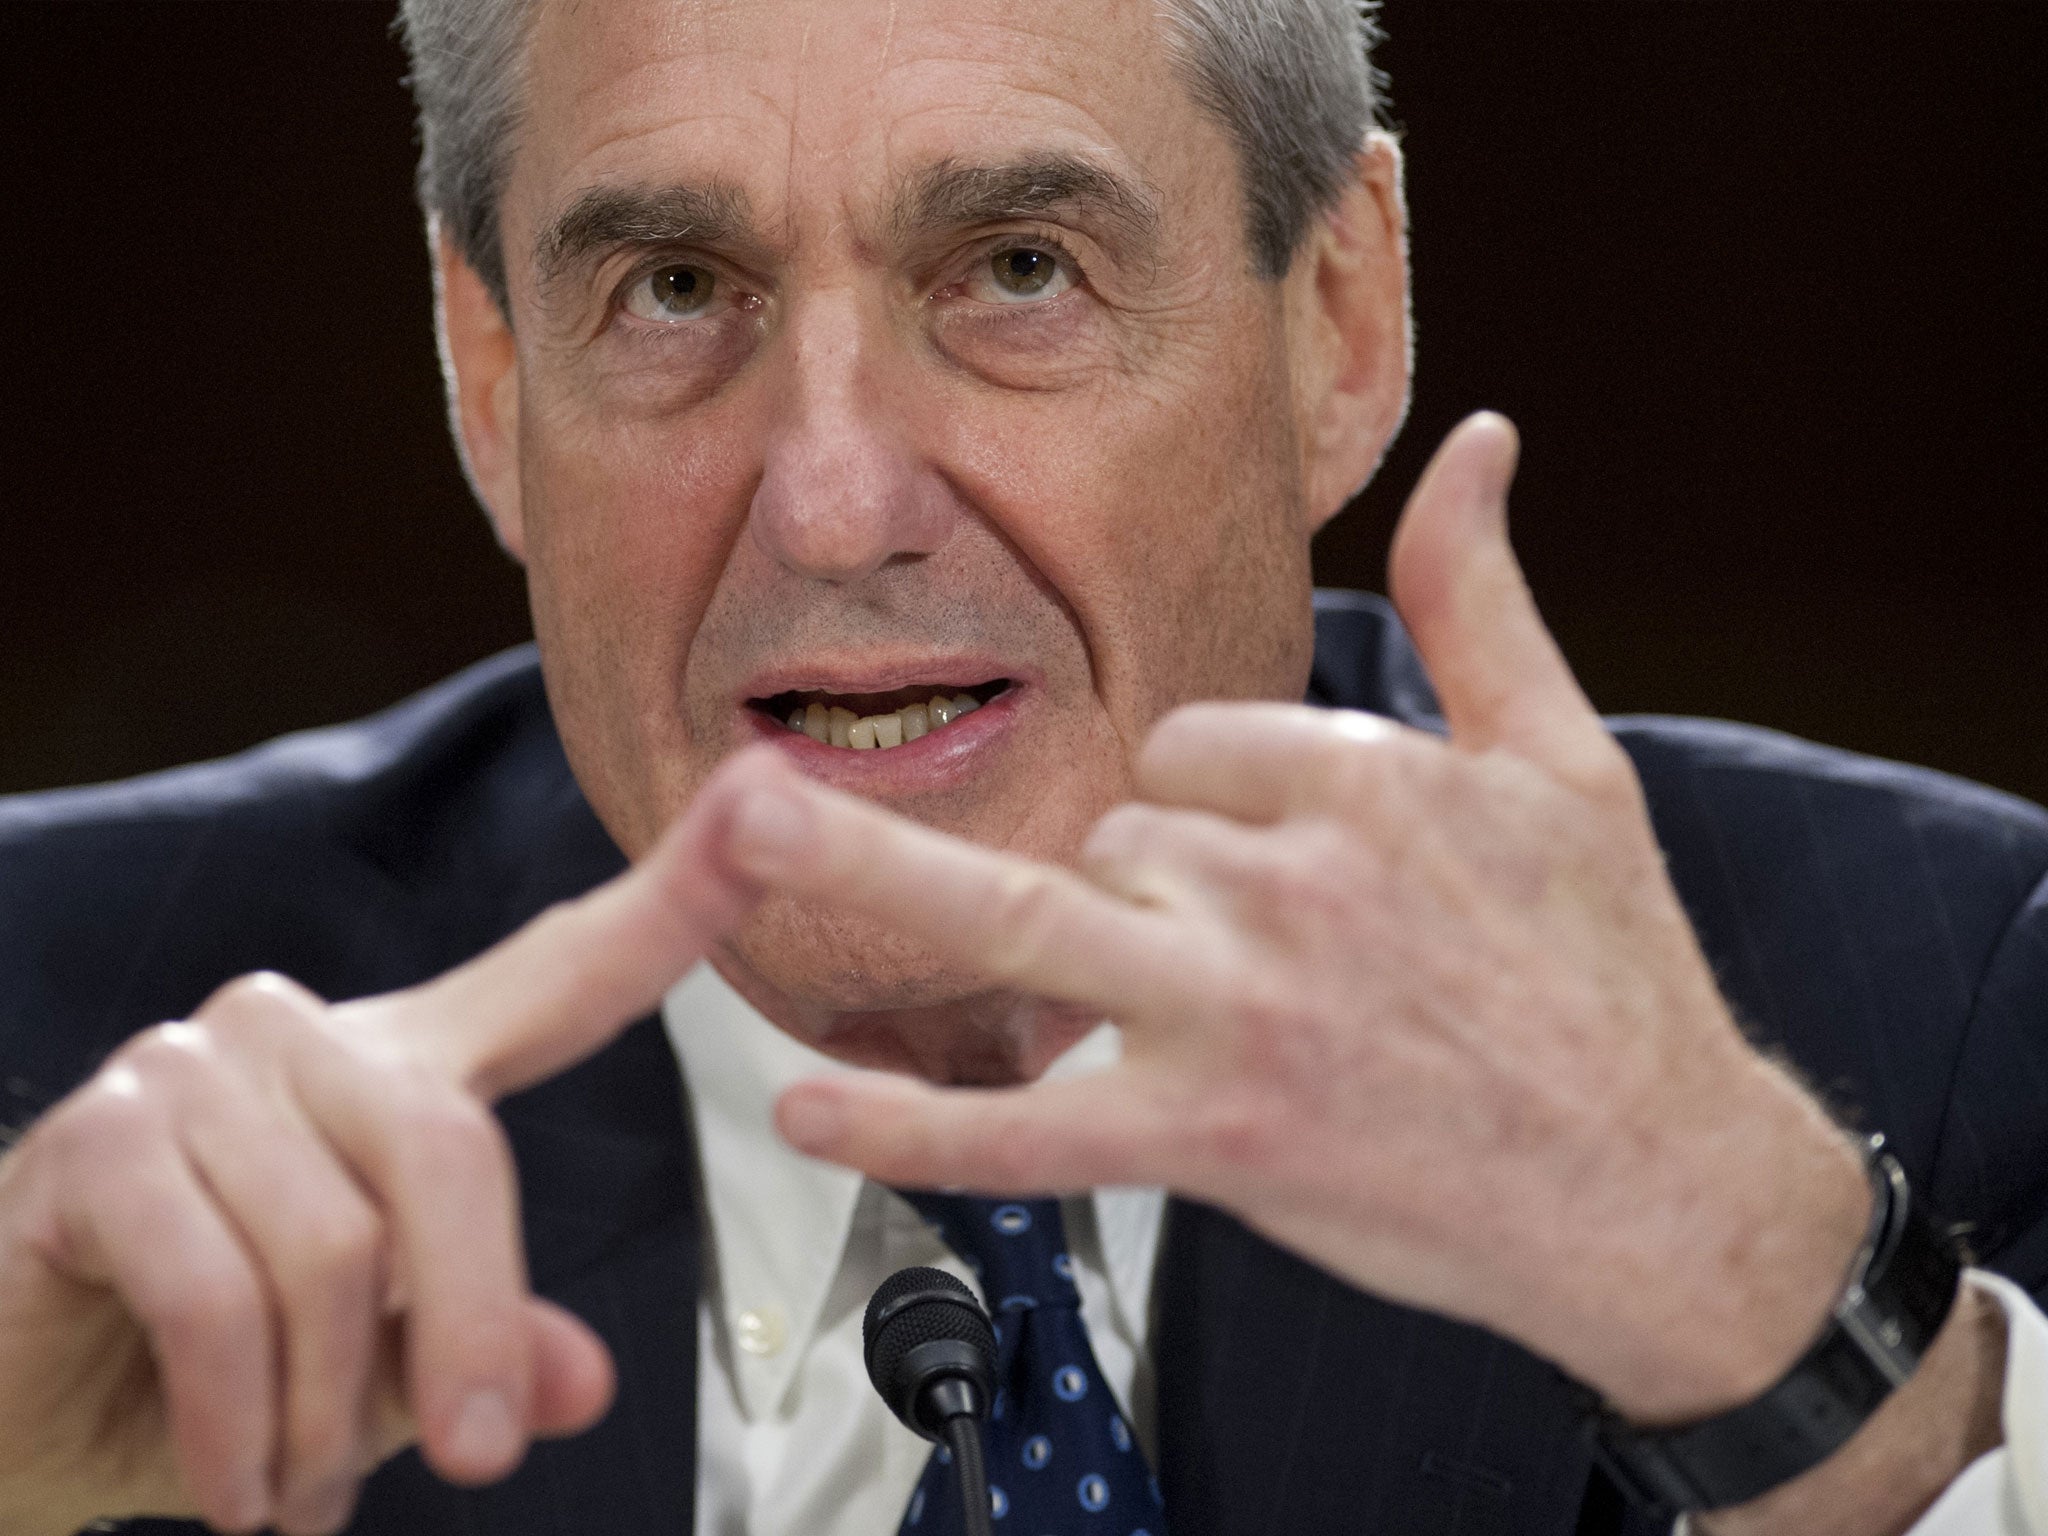 Robert Mueller (pictured) is leading the team investigating Russia's interference in the 2016 presidential election